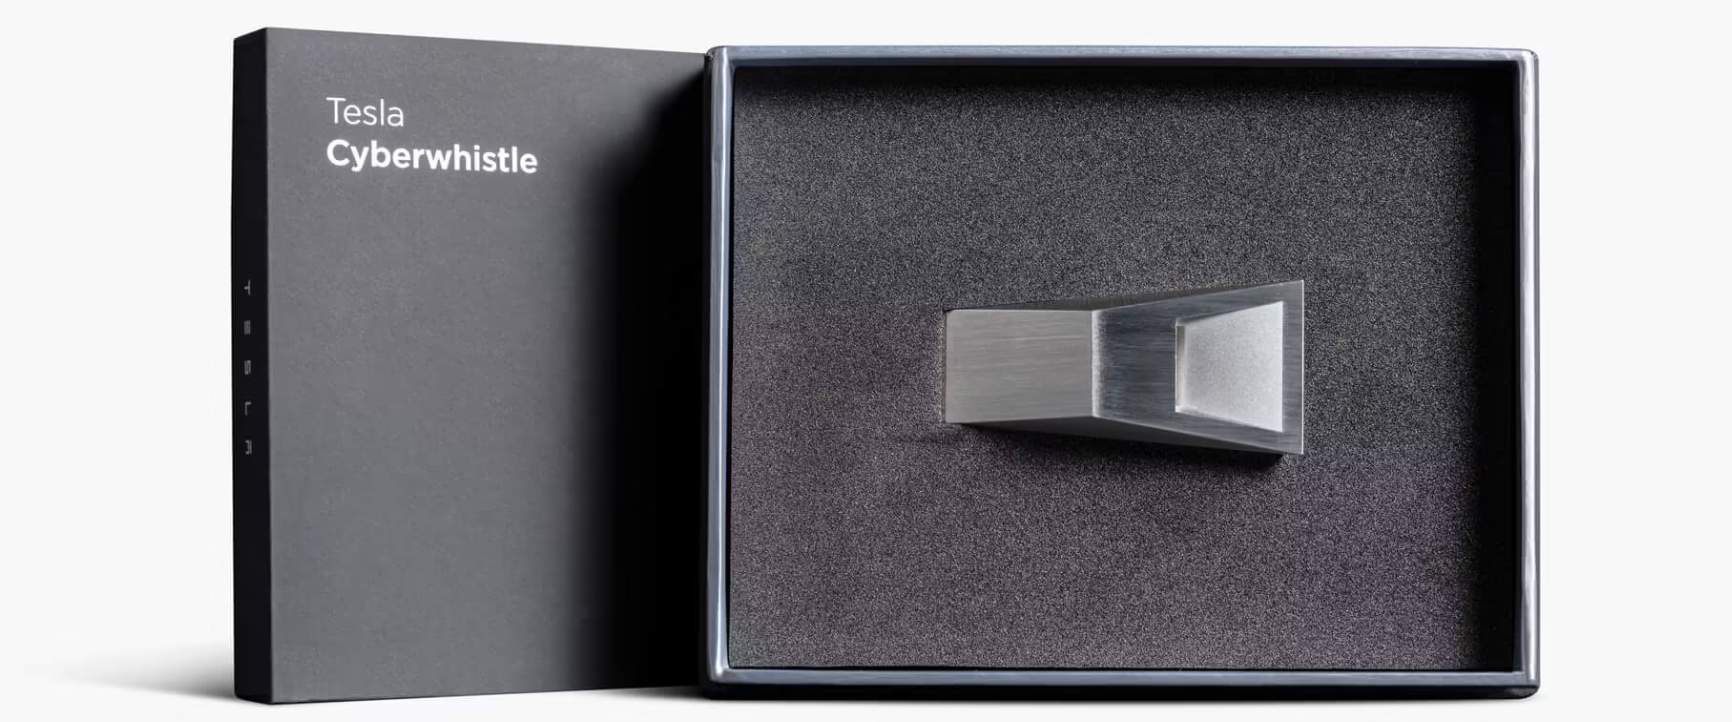 Elon Musk announced Cyberwhistles for $50 - the whole batch has already been sold out